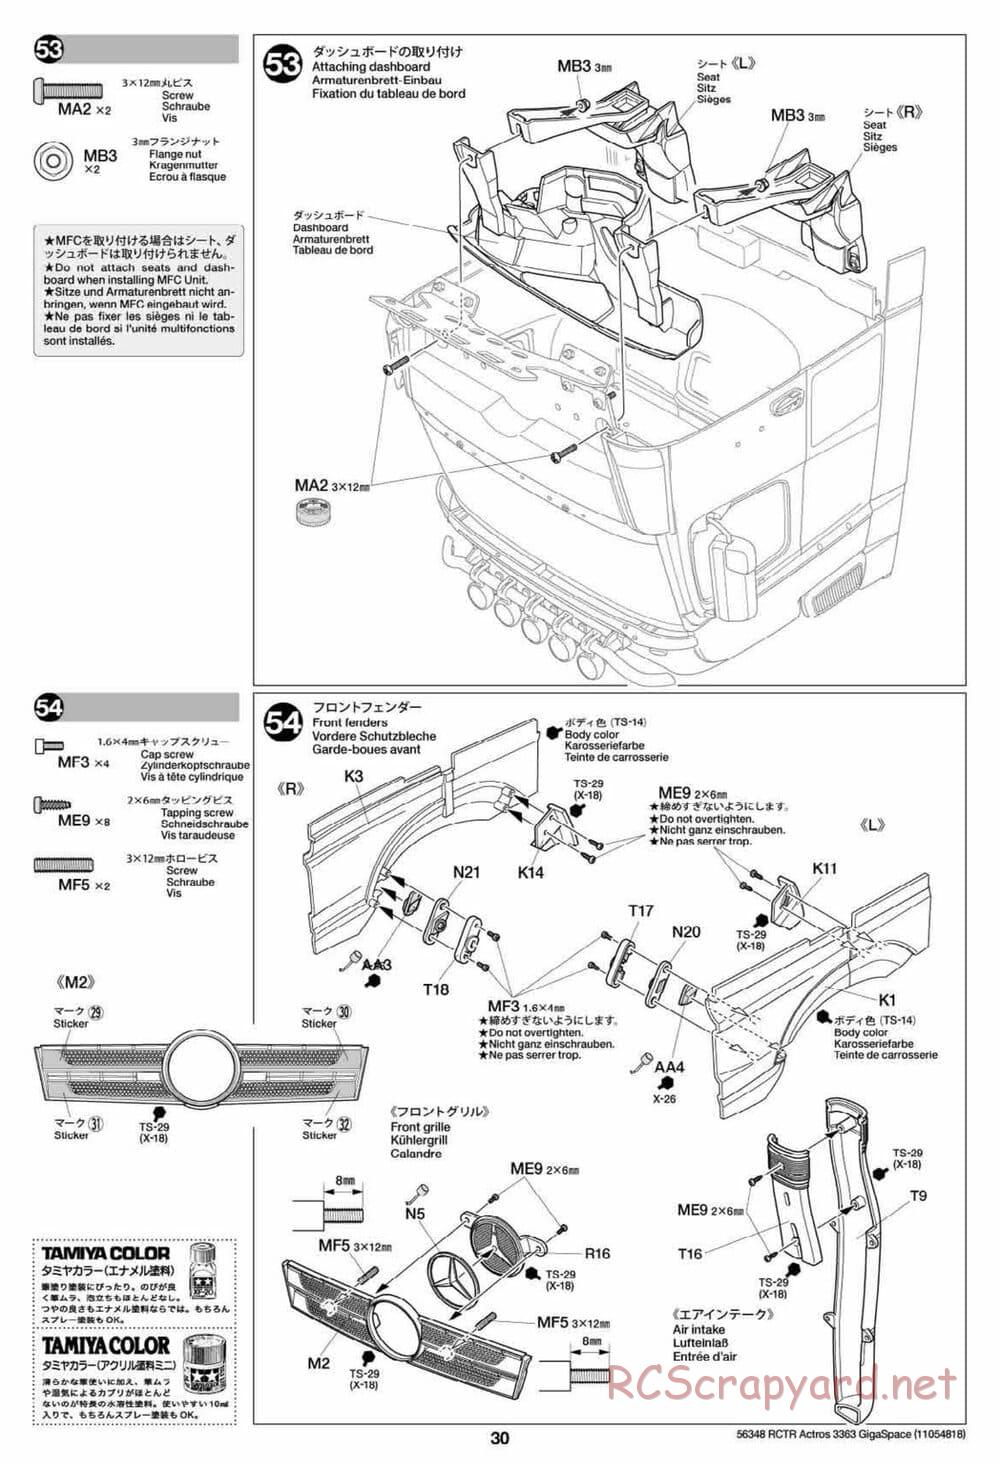 Tamiya - Mercedes-Benz Actros 3363 6x4 GigaSpace Tractor Truck Chassis - Manual - Page 30